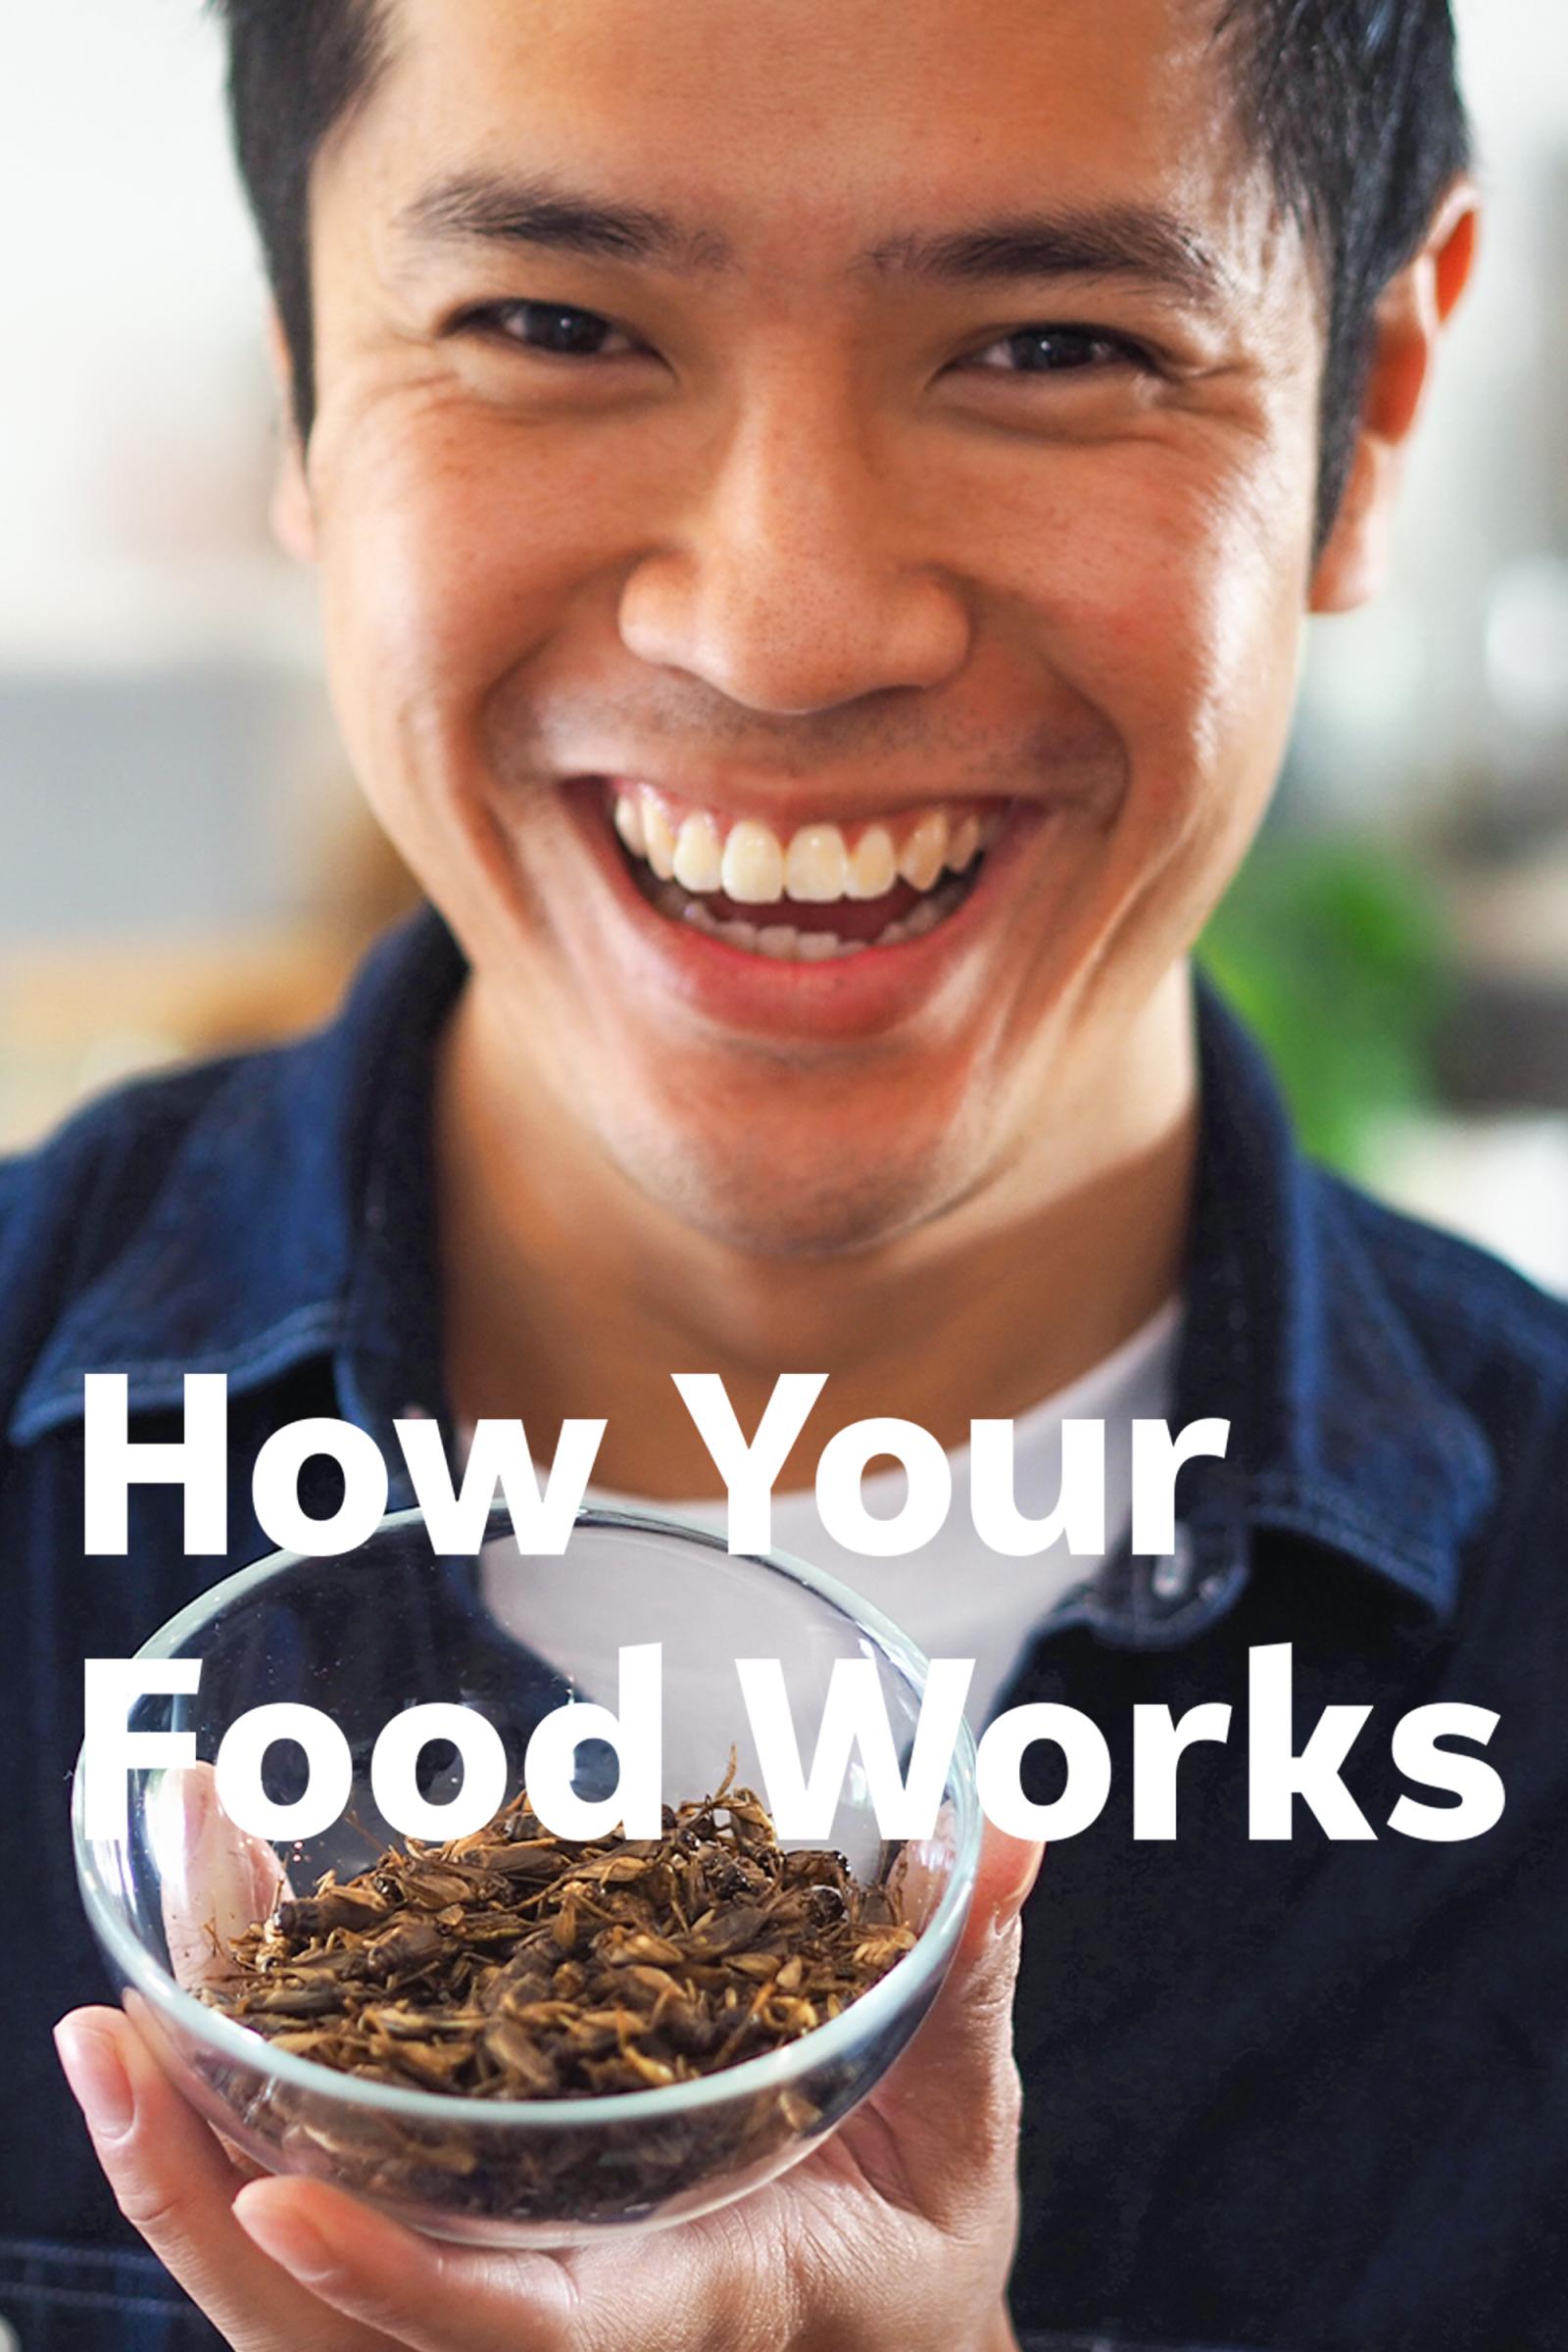 Where to stream How Your Food Works